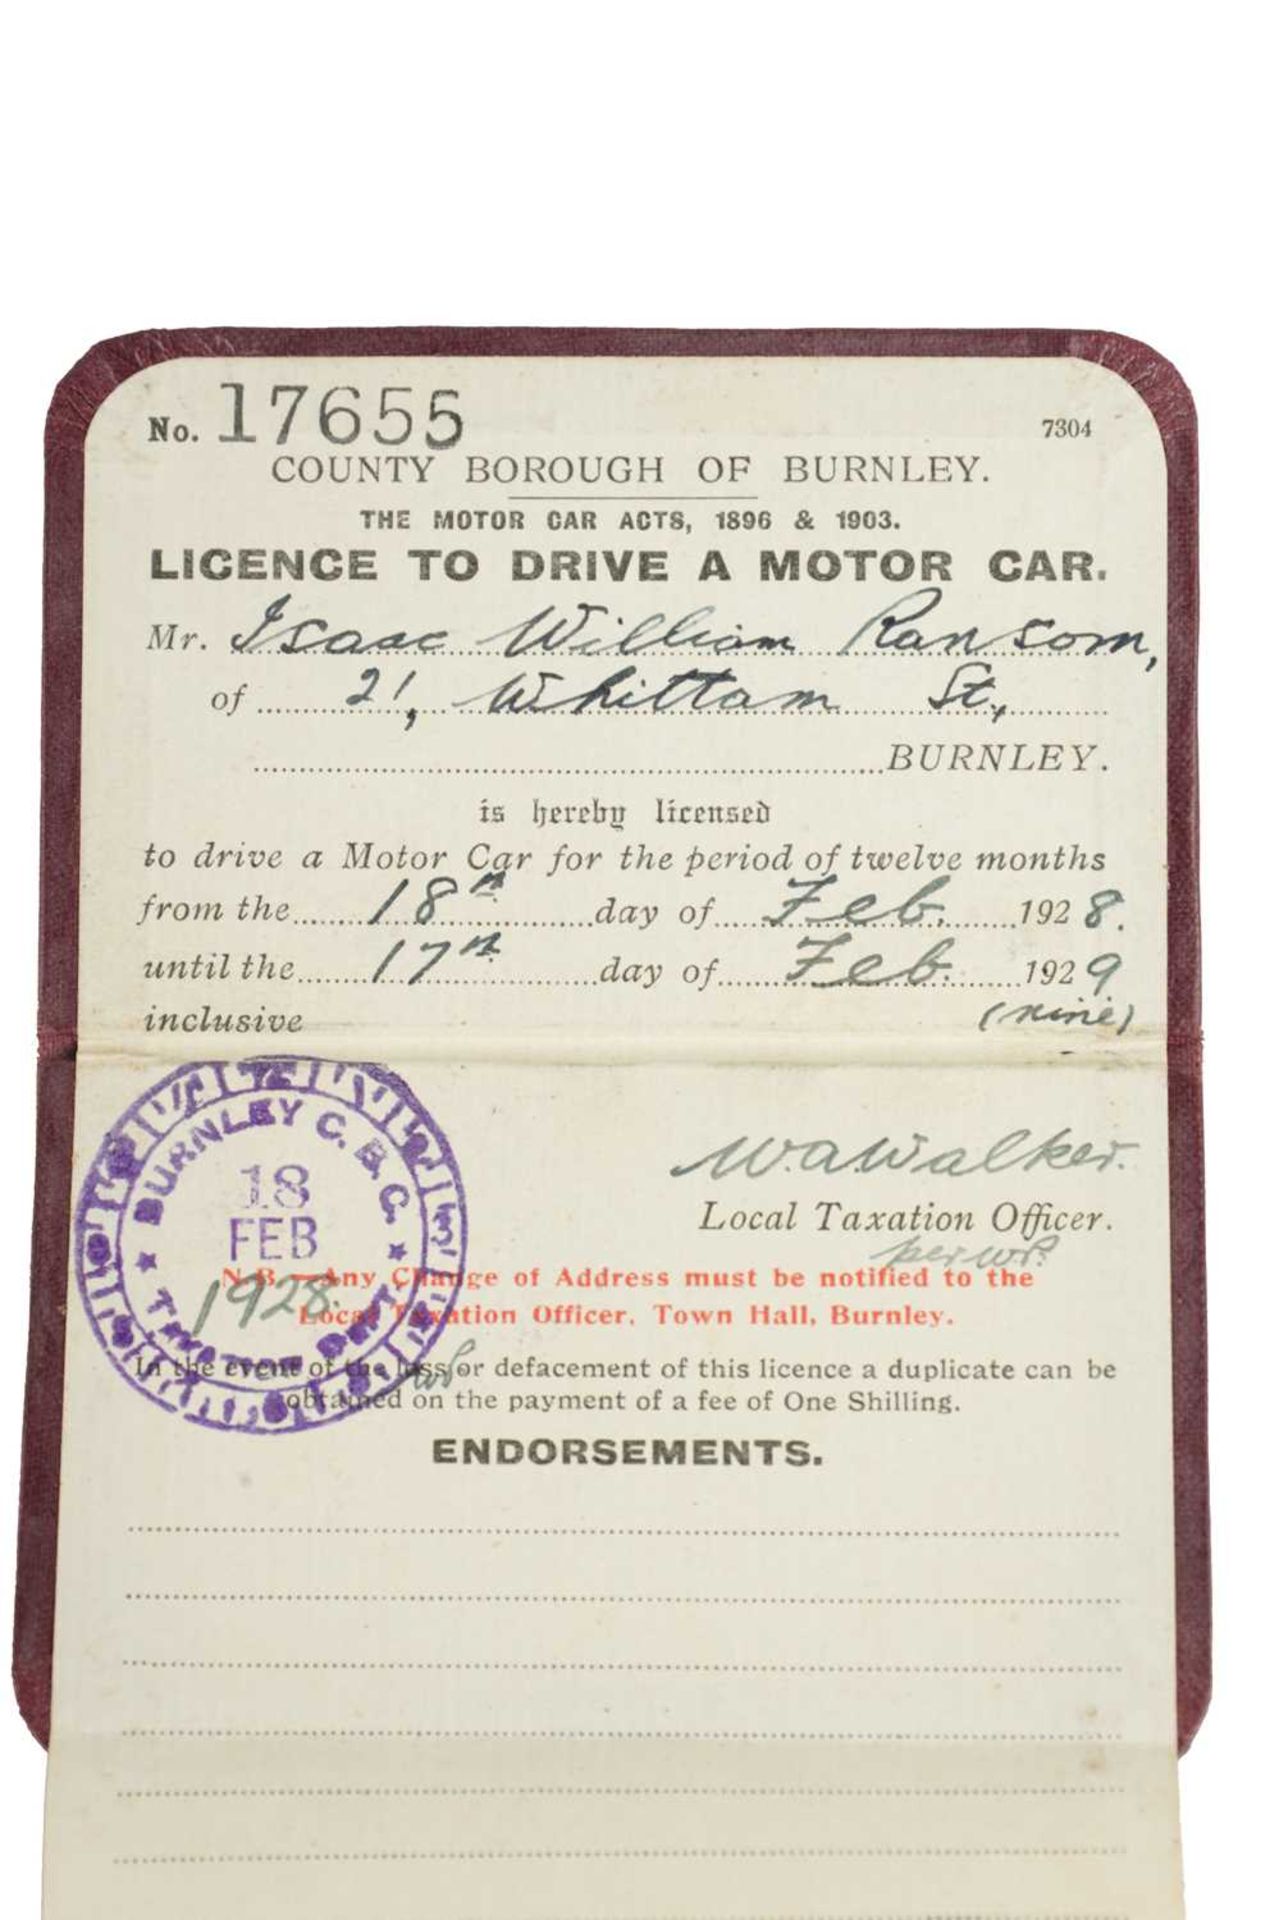 AN ORIGINAL 1928 COUNTY BOROUGH OF BURNLEY DRIVING LICENSE - Image 2 of 4